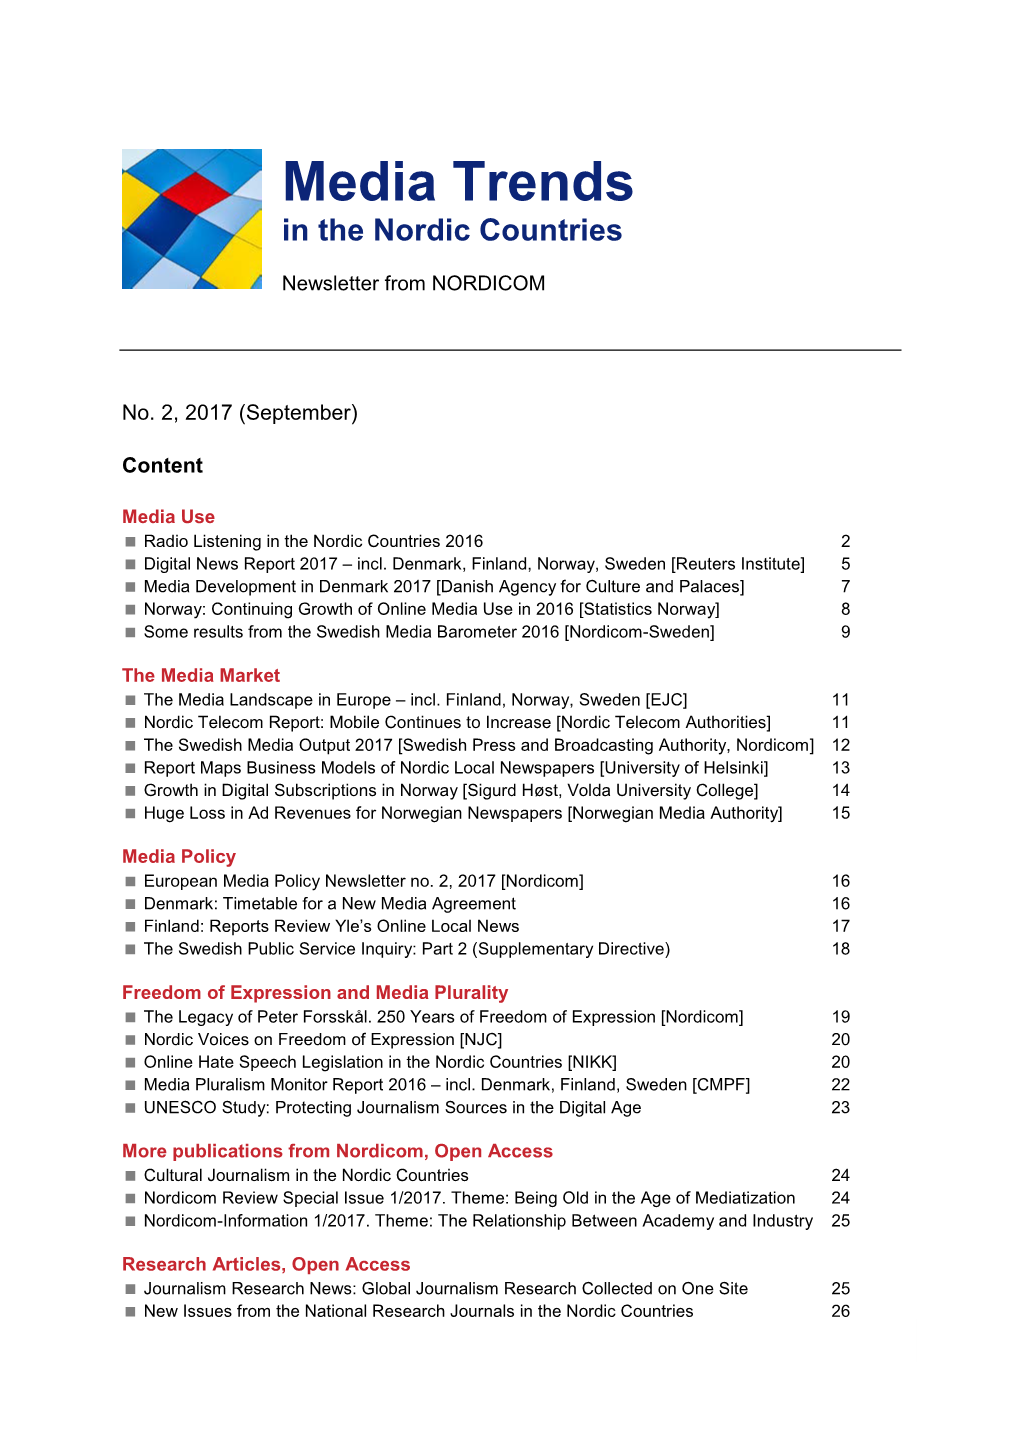 Media Trends in the Nordic Countries 2017